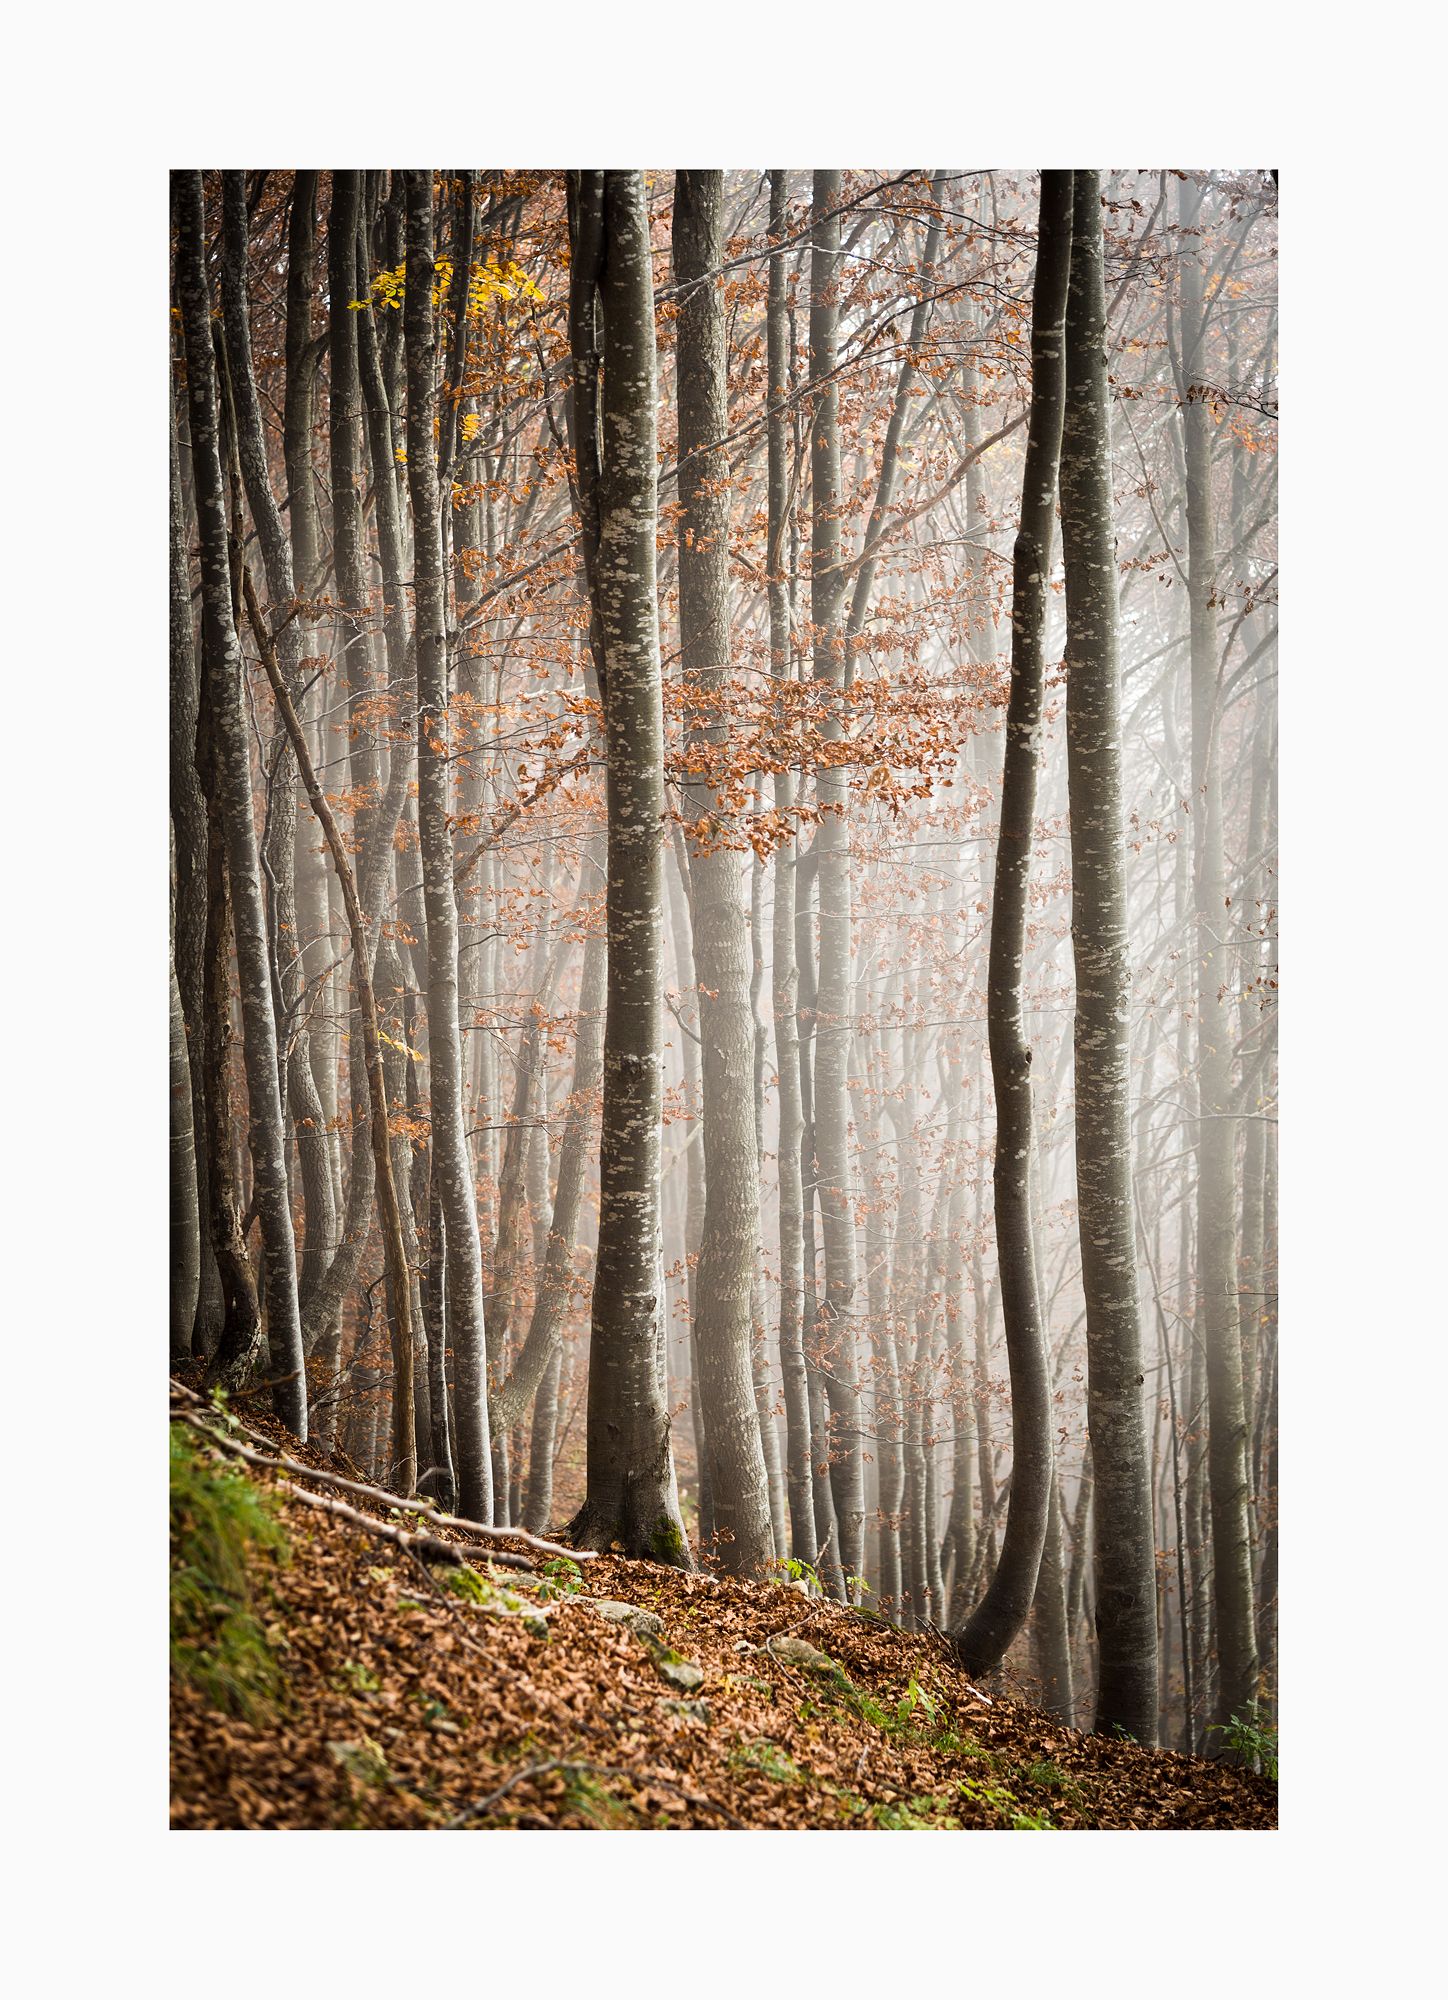 Beech forest in the fog...